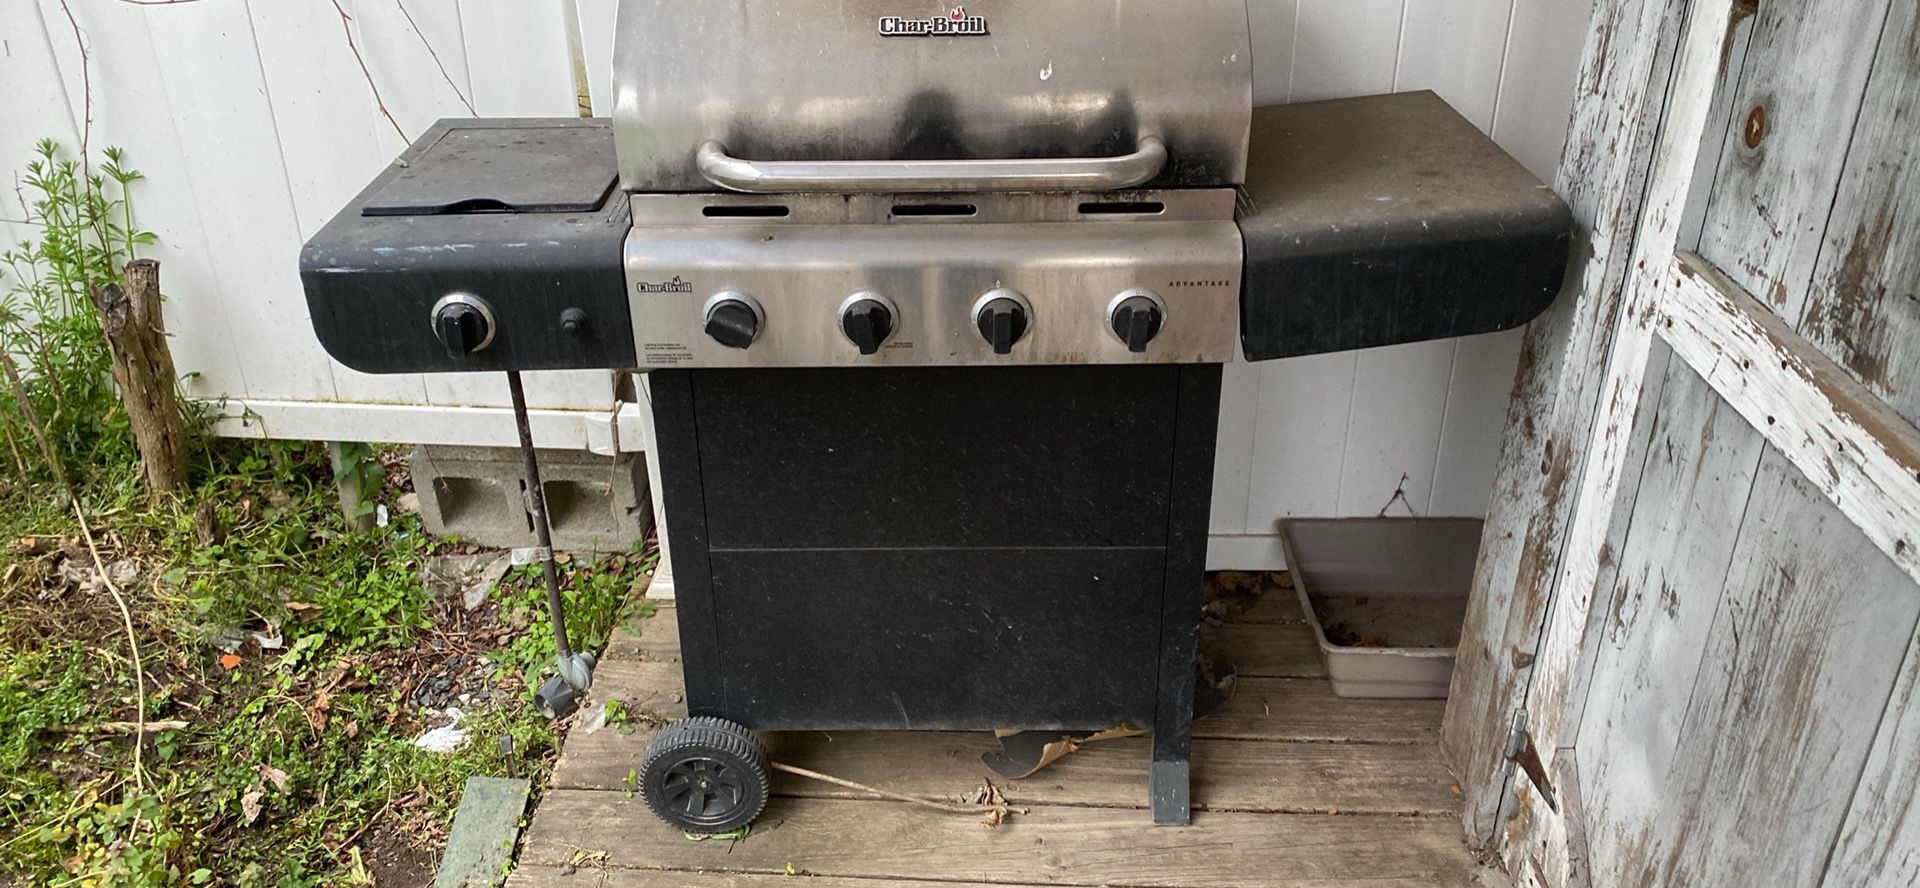 FREE USED GAS GRILL